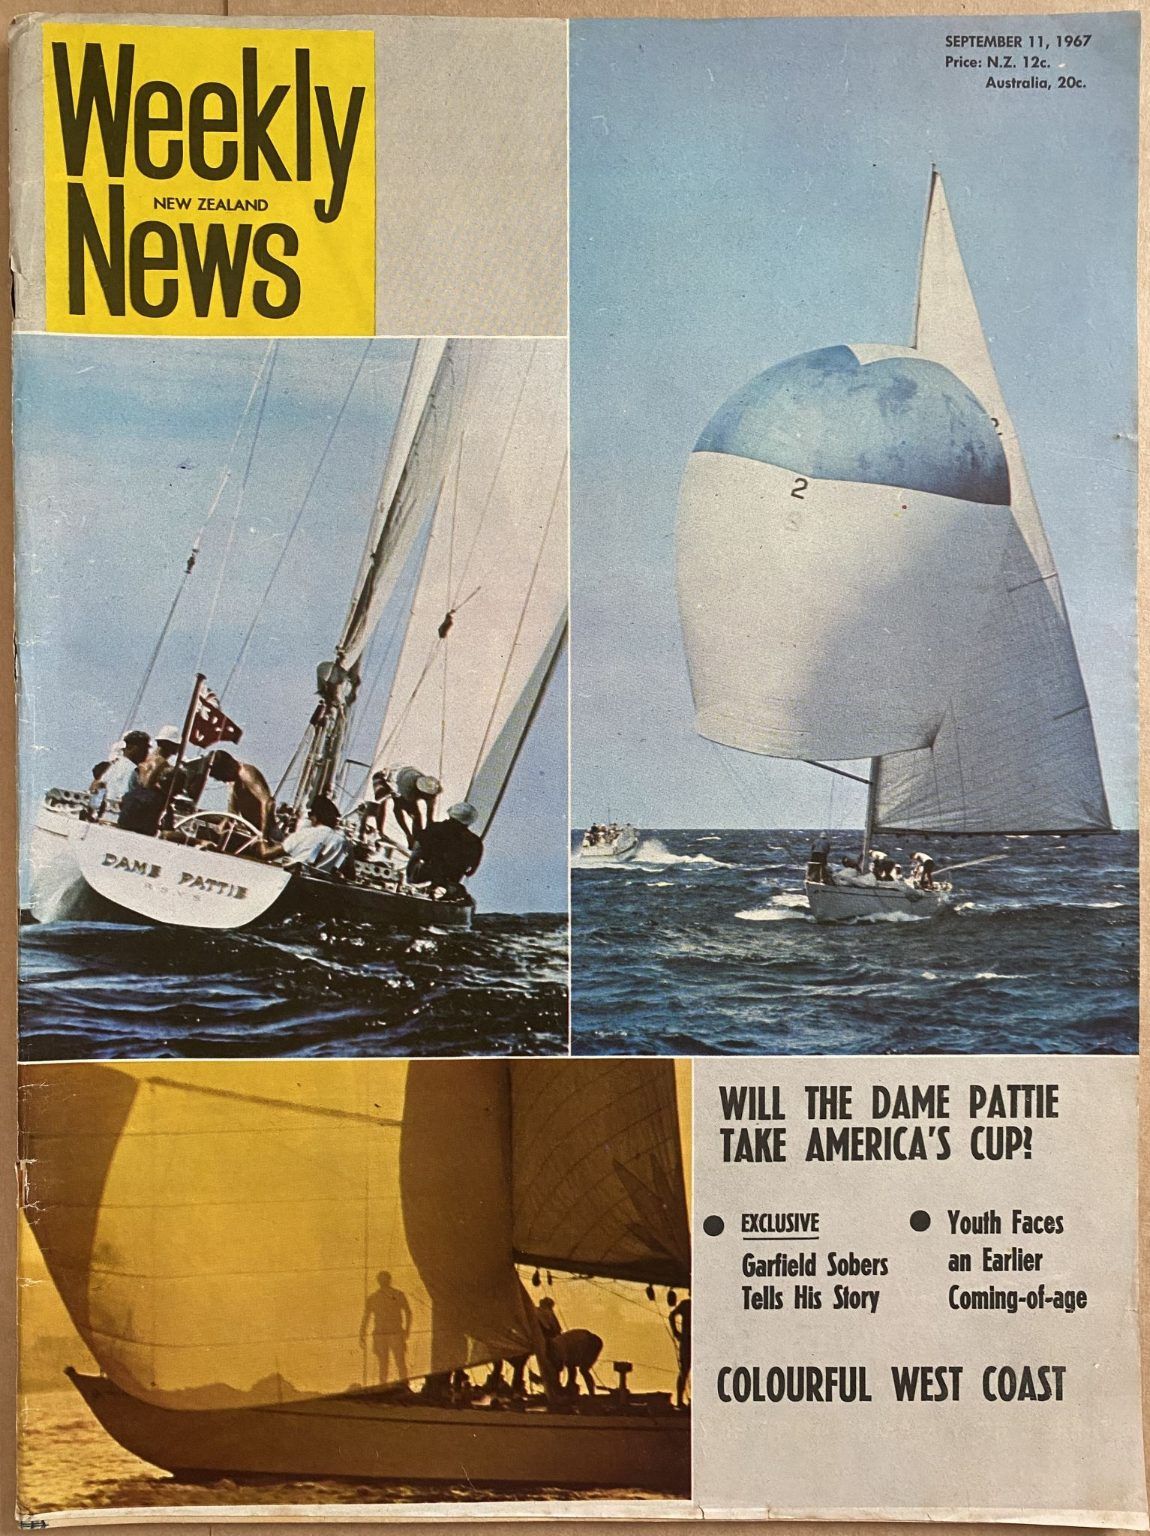 OLD NEWSPAPER: New Zealand Weekly News, No. 5415, 11 September 1967